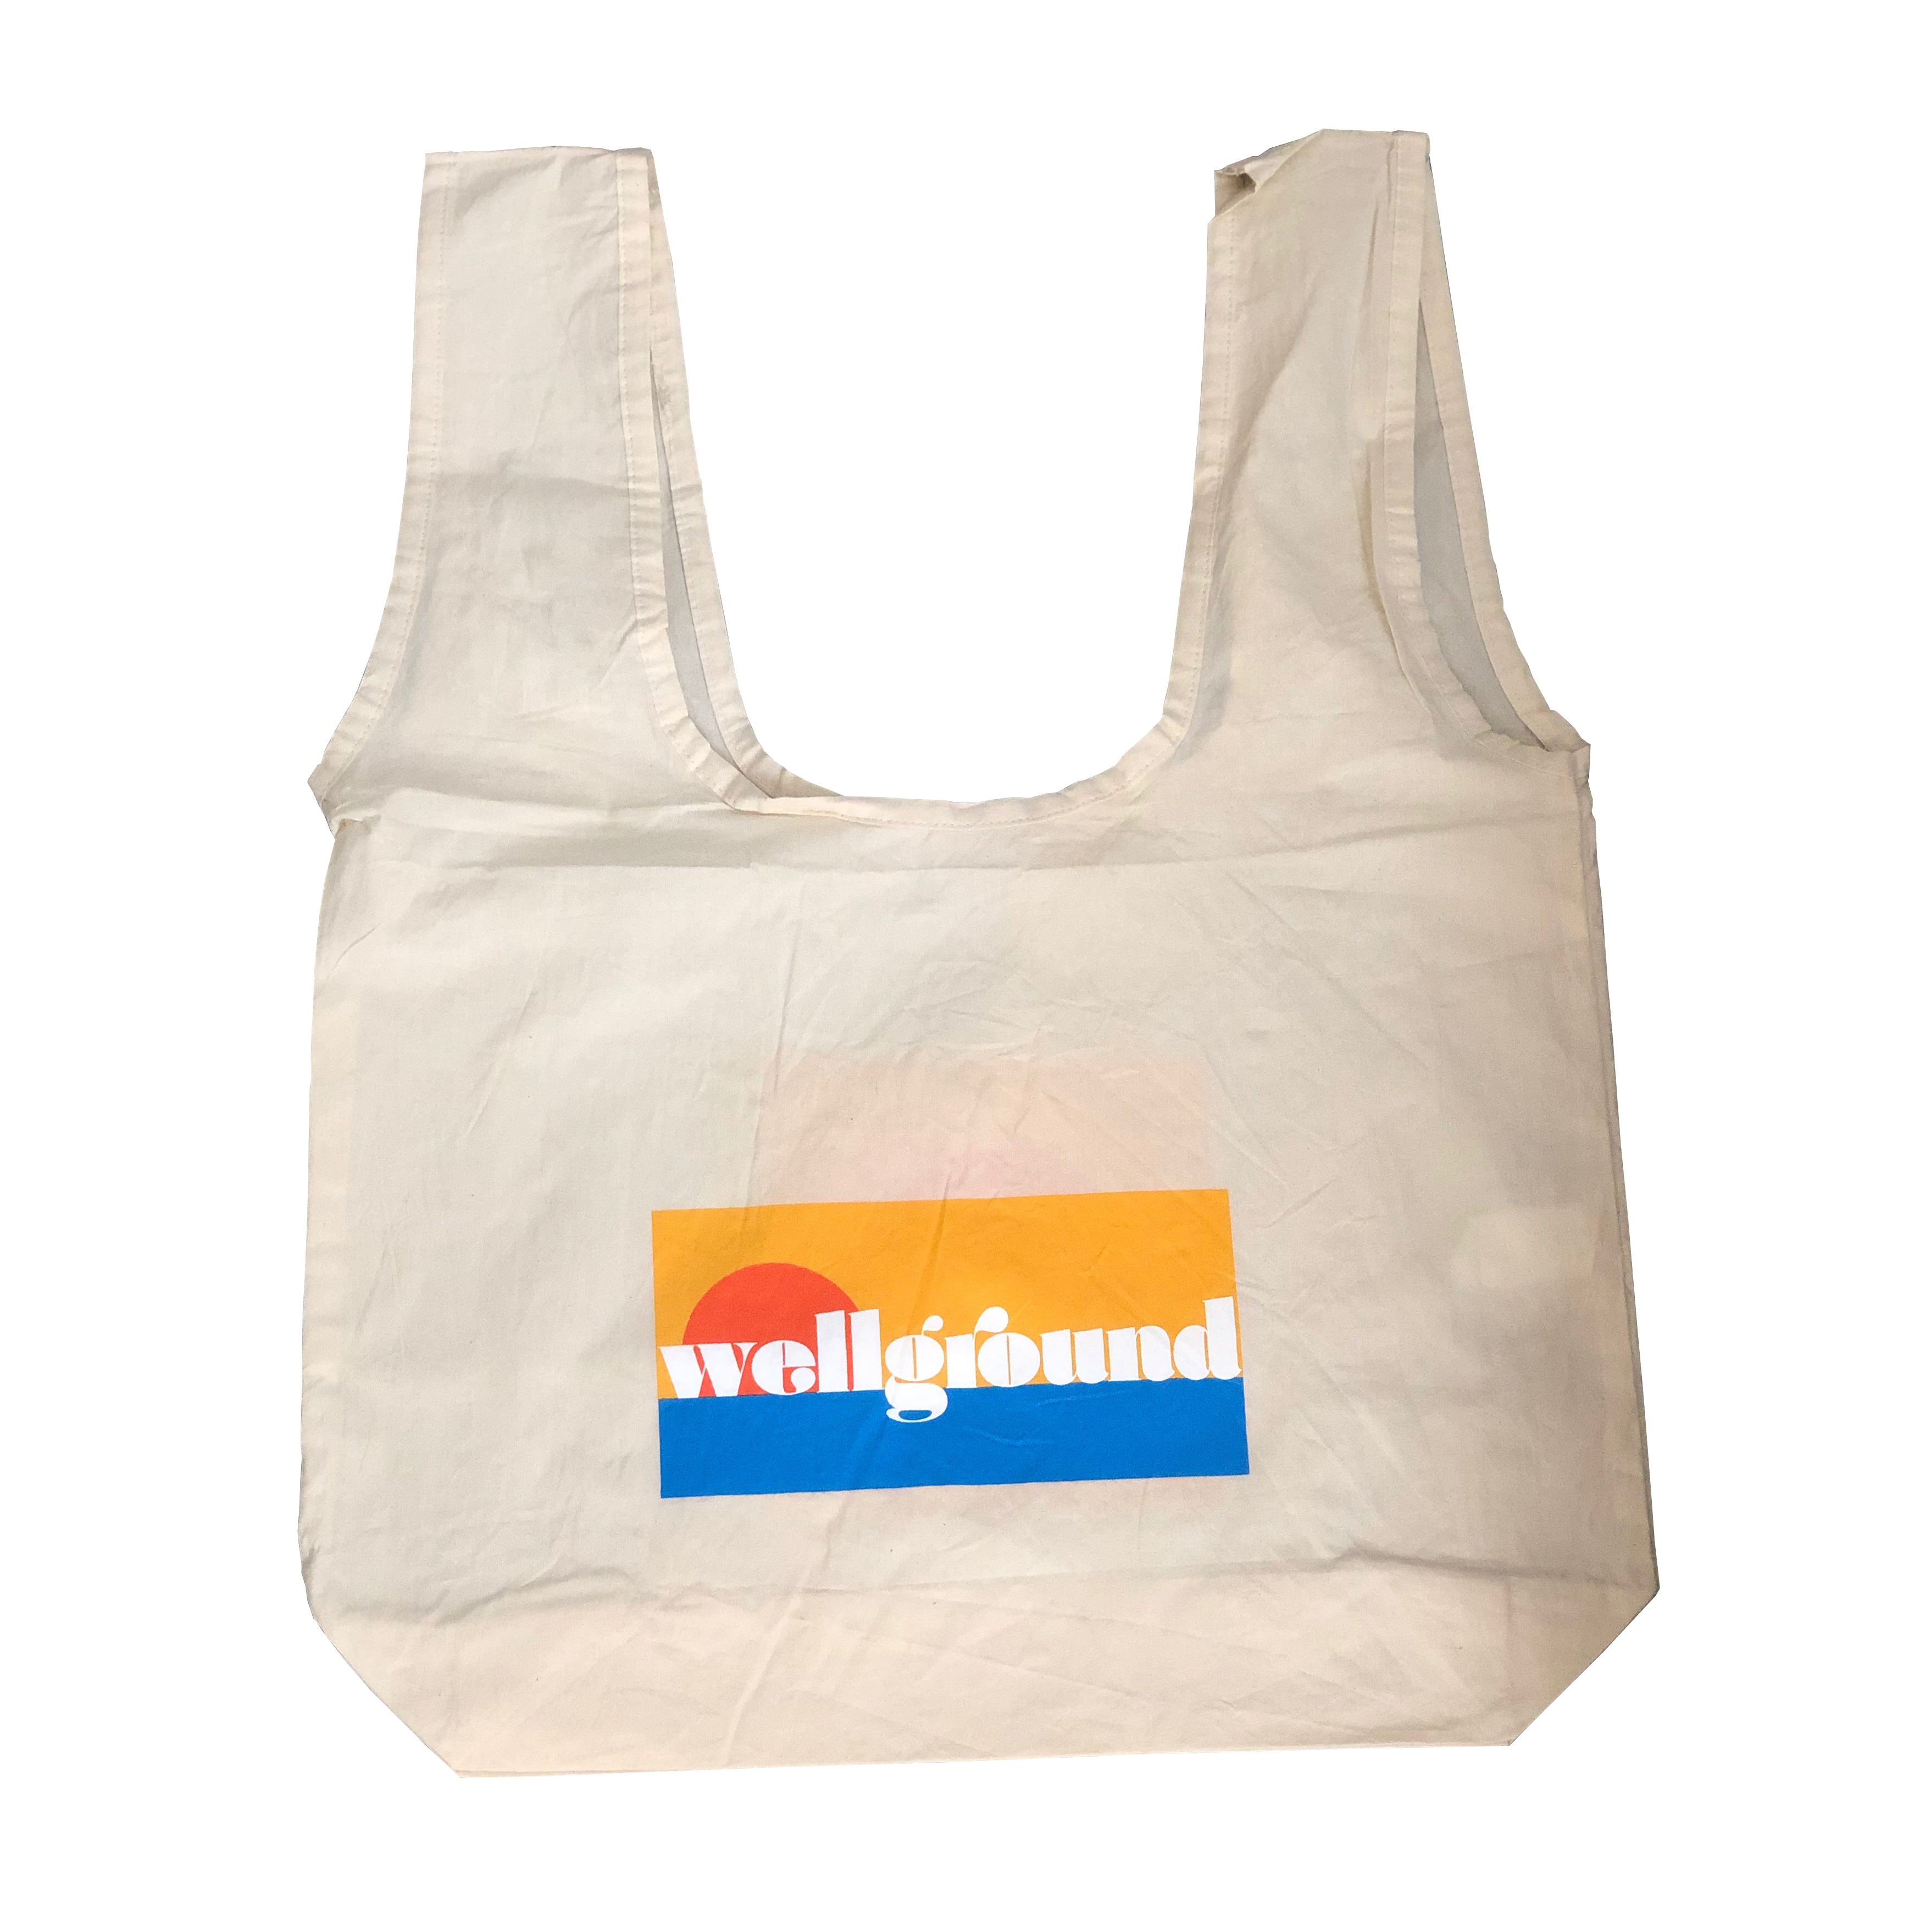 Wellground Reusable Tote